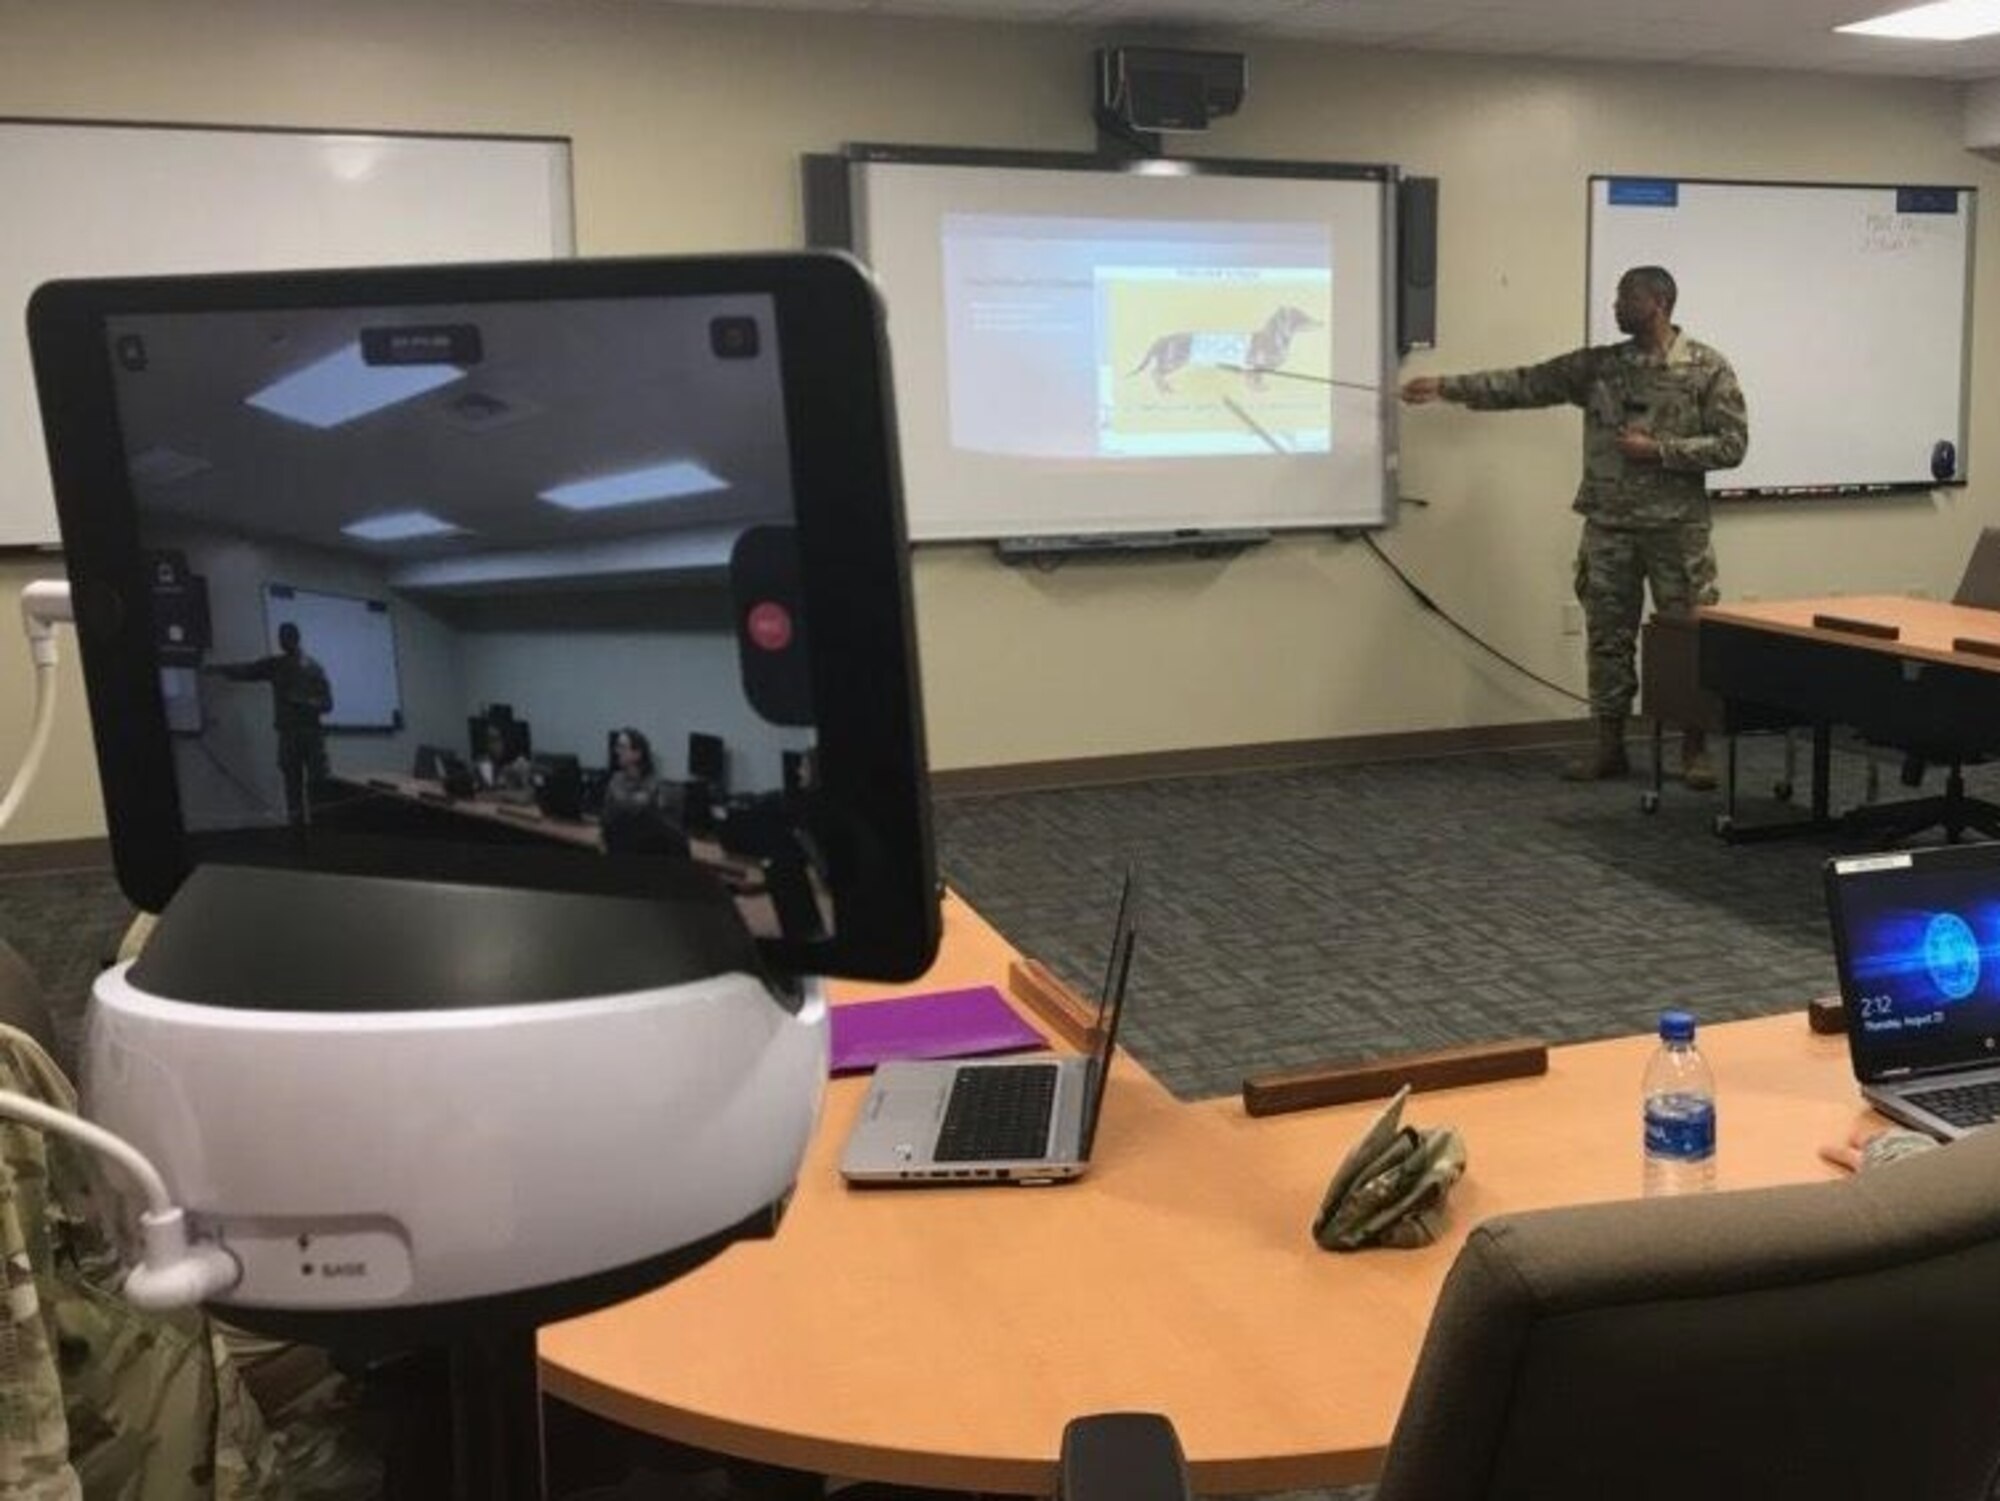 A basic instructor course instructor conducts a lecture while using the Swivl video robot on Keesler Air Force Base, Mississippi, August 27, 2019. Swivl is a video robot designed to allow students to assess their own performance in the classroom, while increasing student engagement and supporting the Student-Centered Active Learning Environment with Upside-down Pedagogies learning model. Swivl gives students more ownership of their learning while reinforcing student interaction learning strategies: student-to-content, student-to-student, and student-to-instructor.